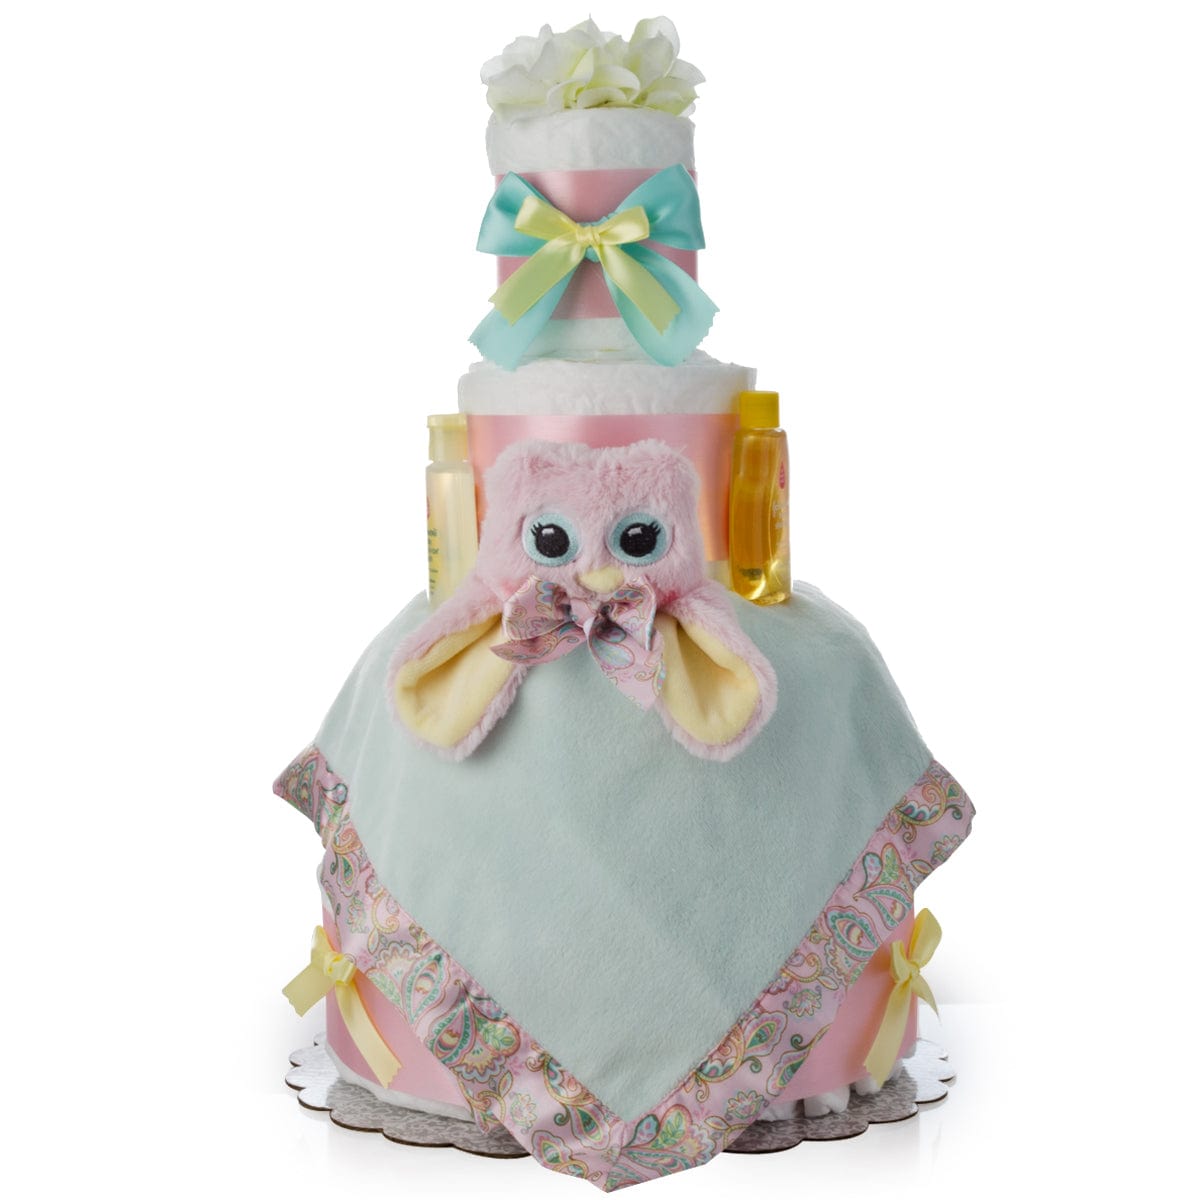 Lil' Baby Cakes Hoo Loves You Owl Diaper Cake